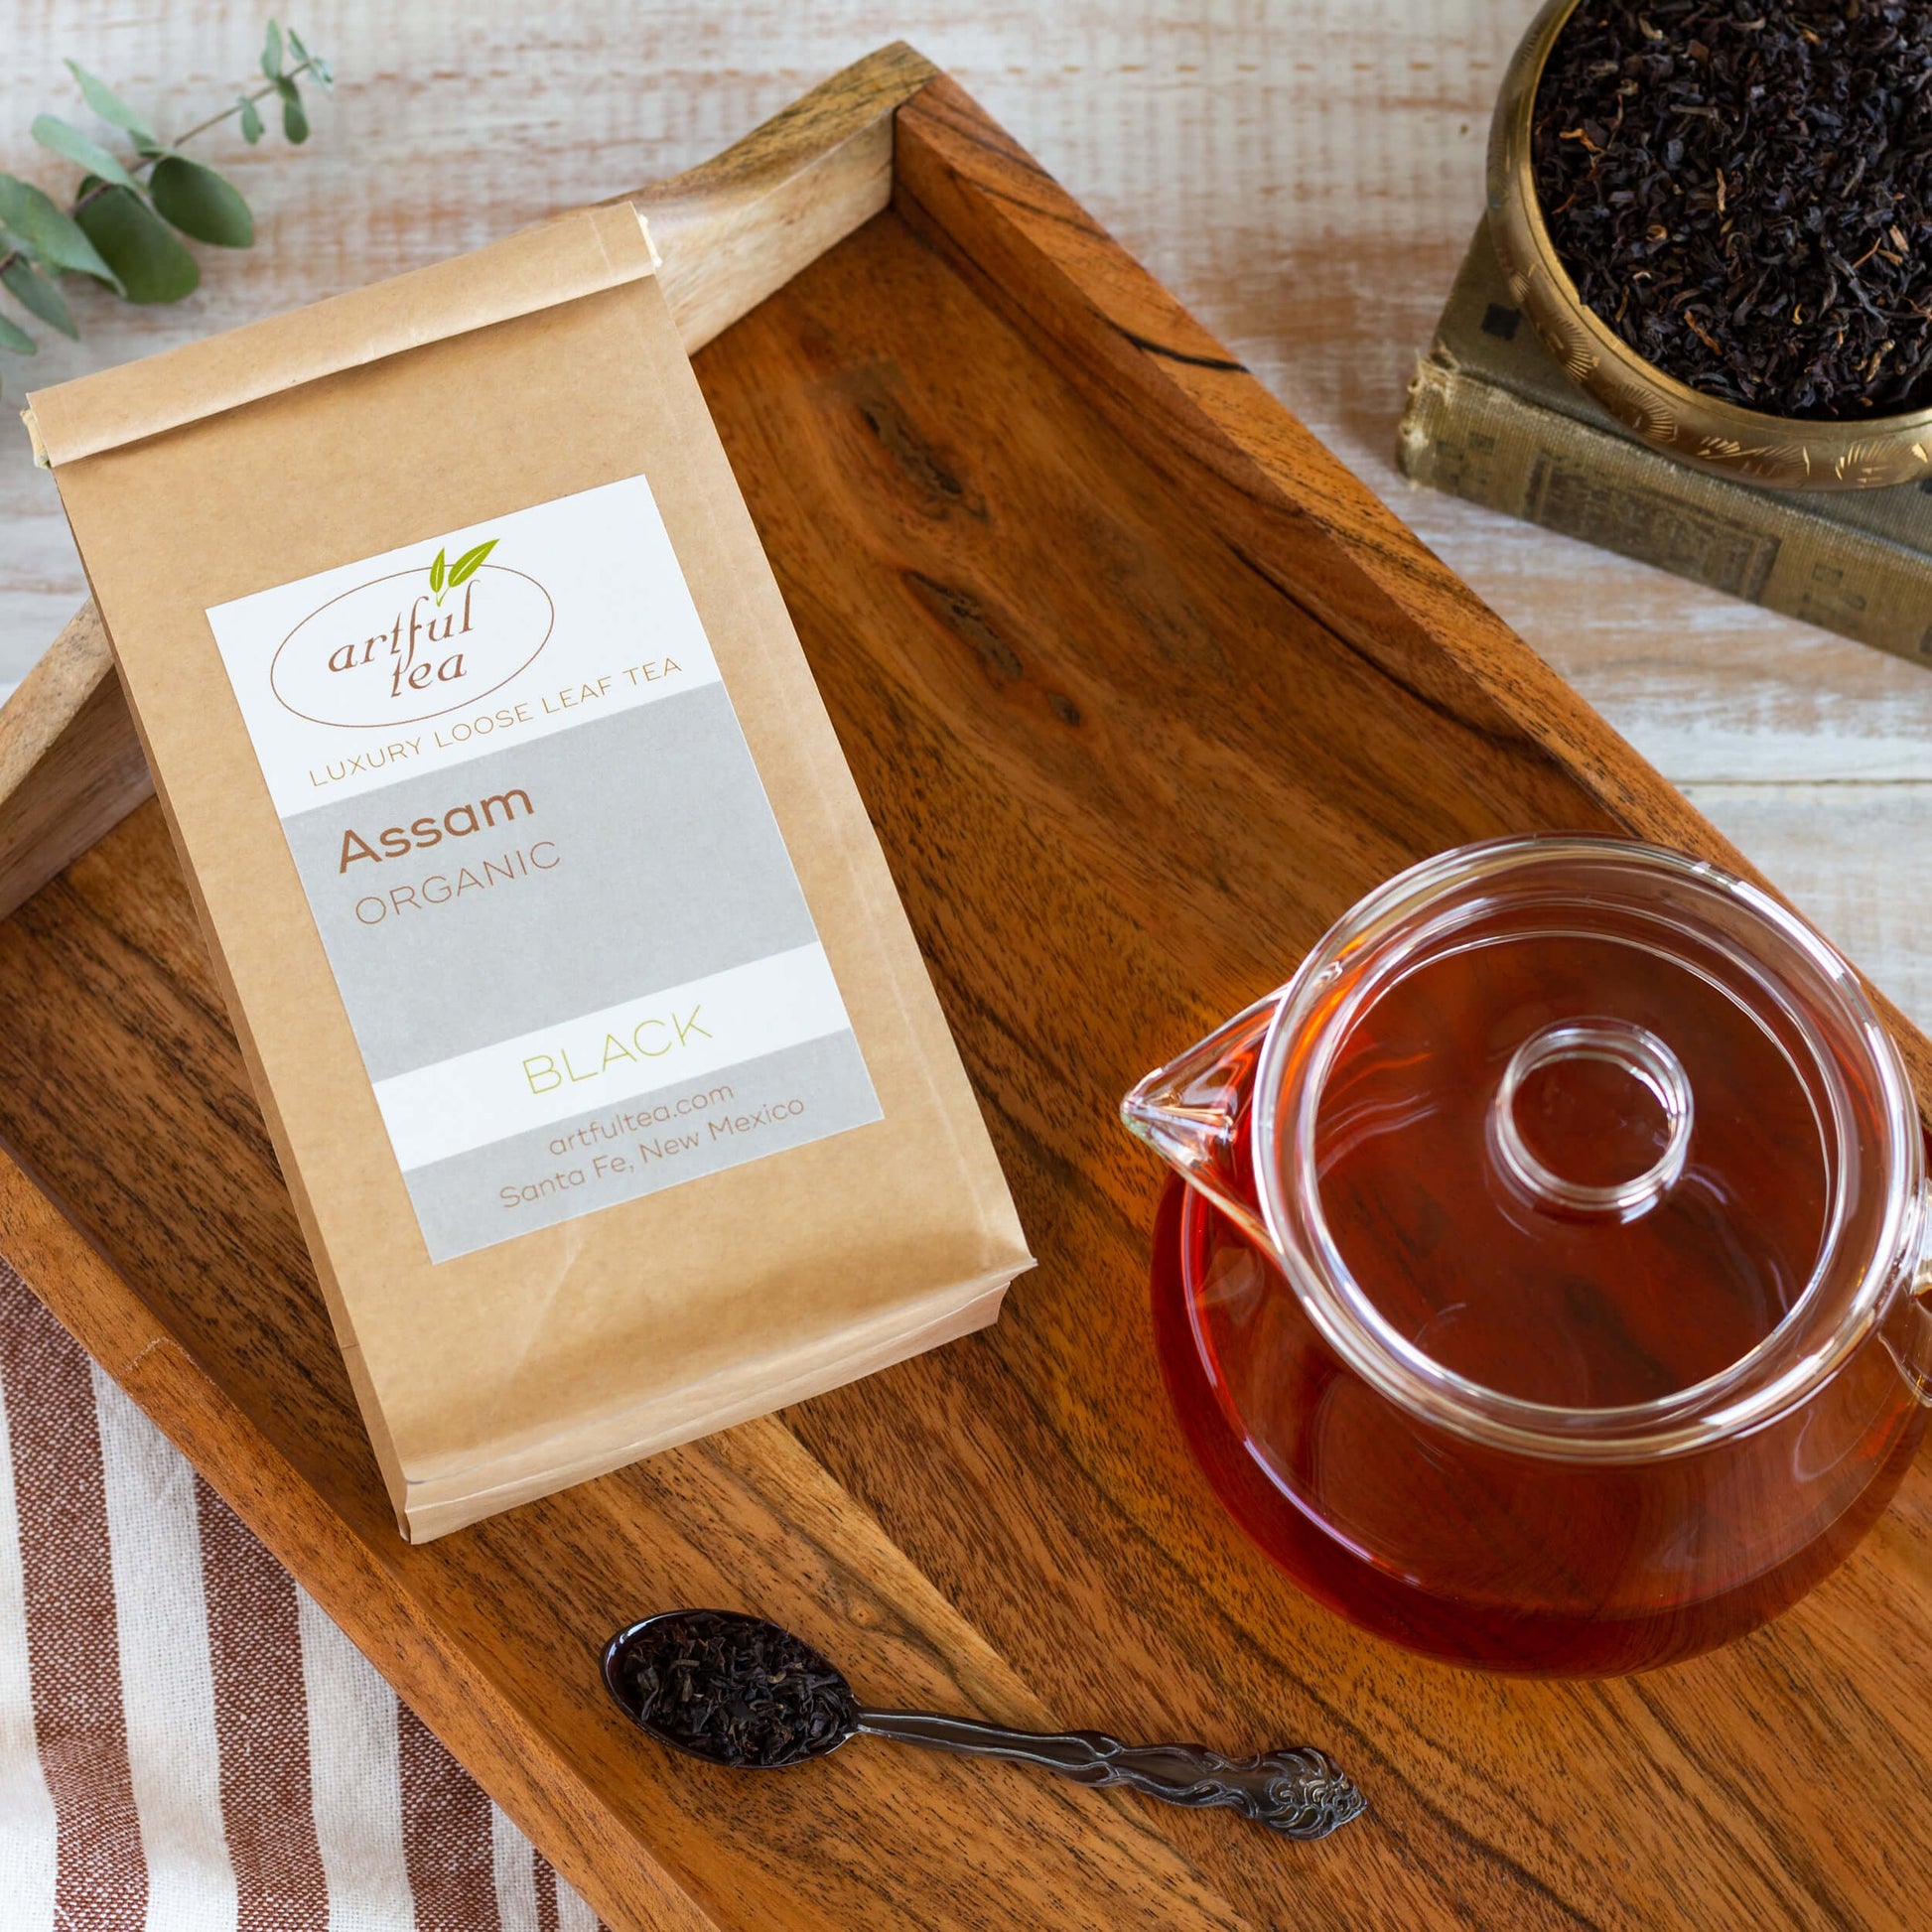 Organic Assam Black Tea shown packaged in kraft bag, on a wooden tray with a glass teapot and spoon of loose tea